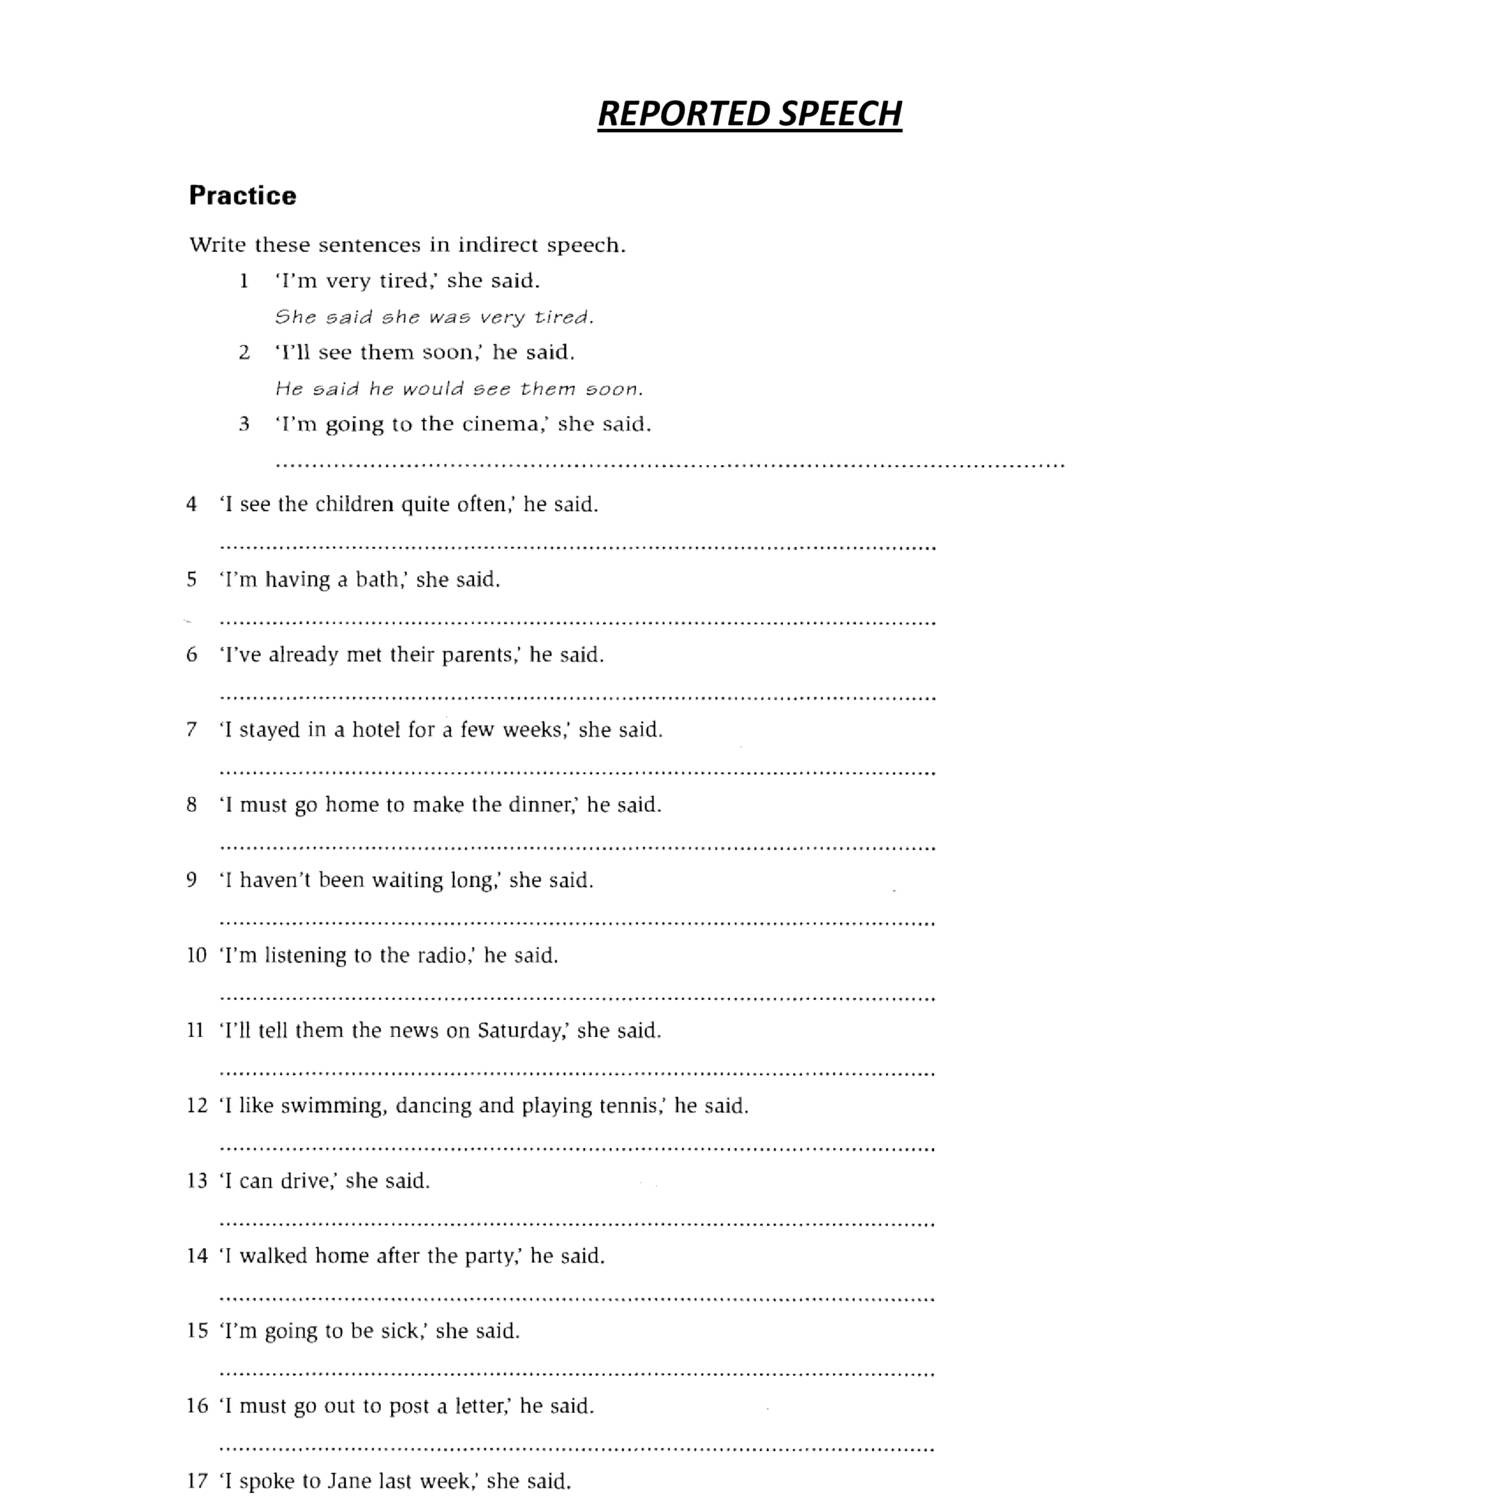 introductory verbs in reported speech exercises pdf